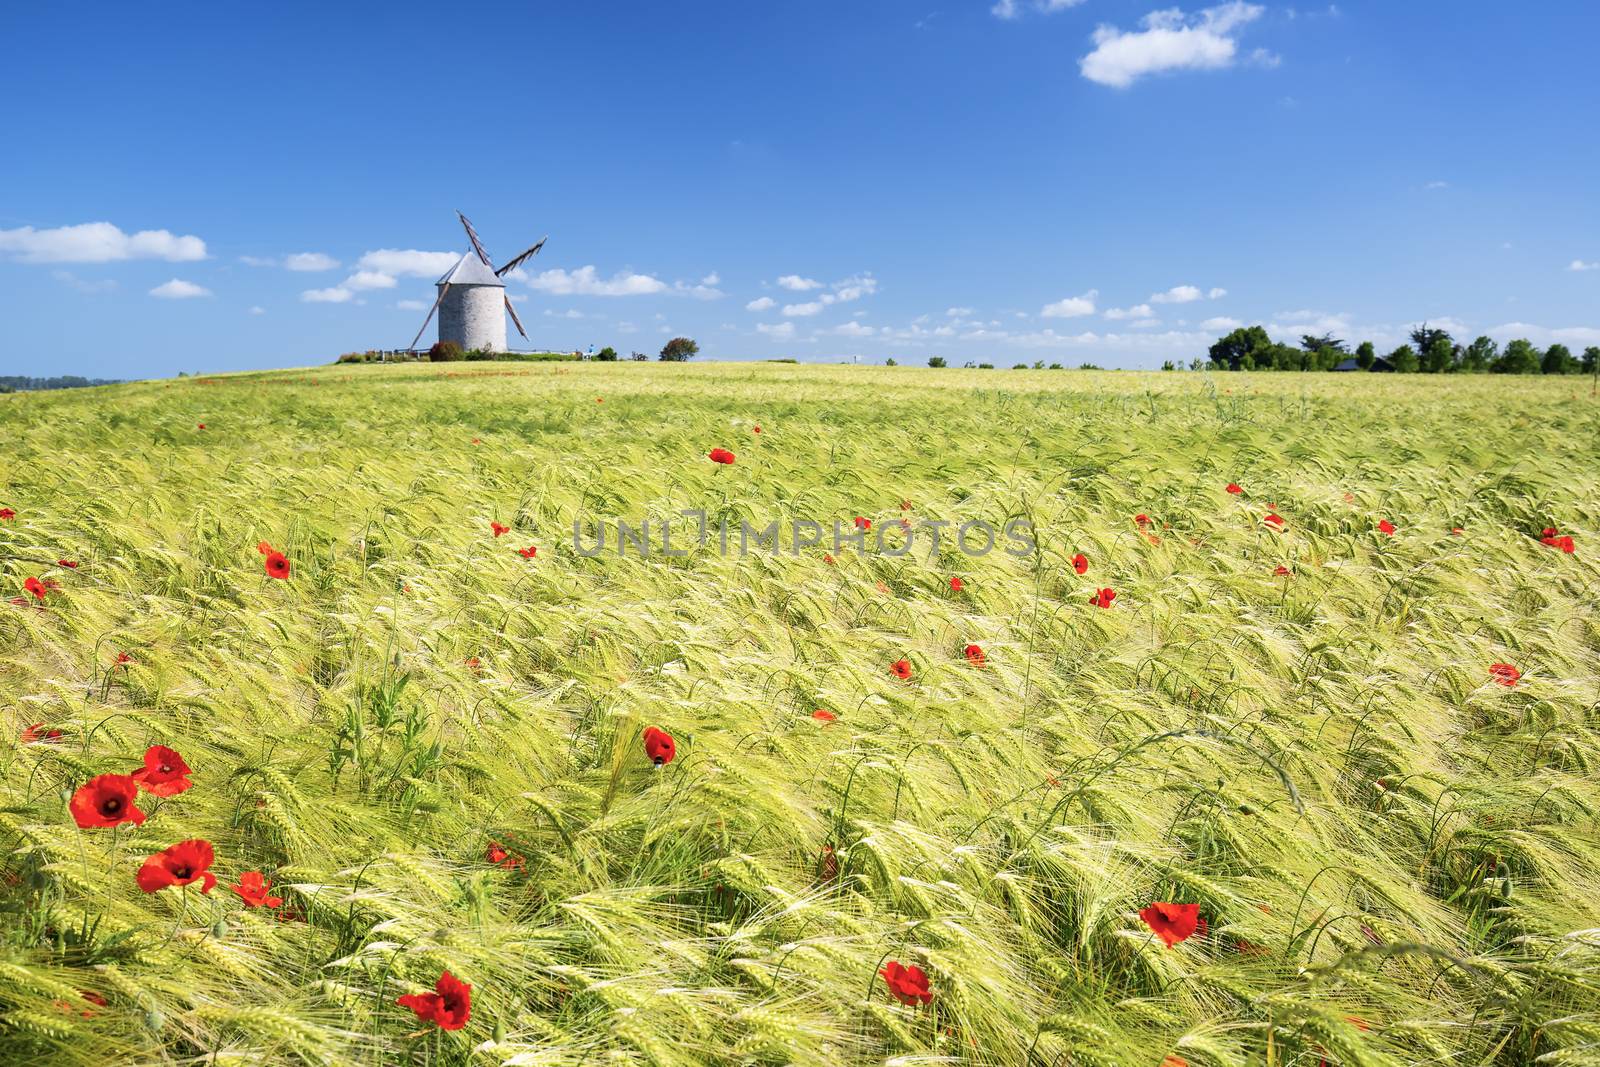 Windmill and wheat field, France, Europe.